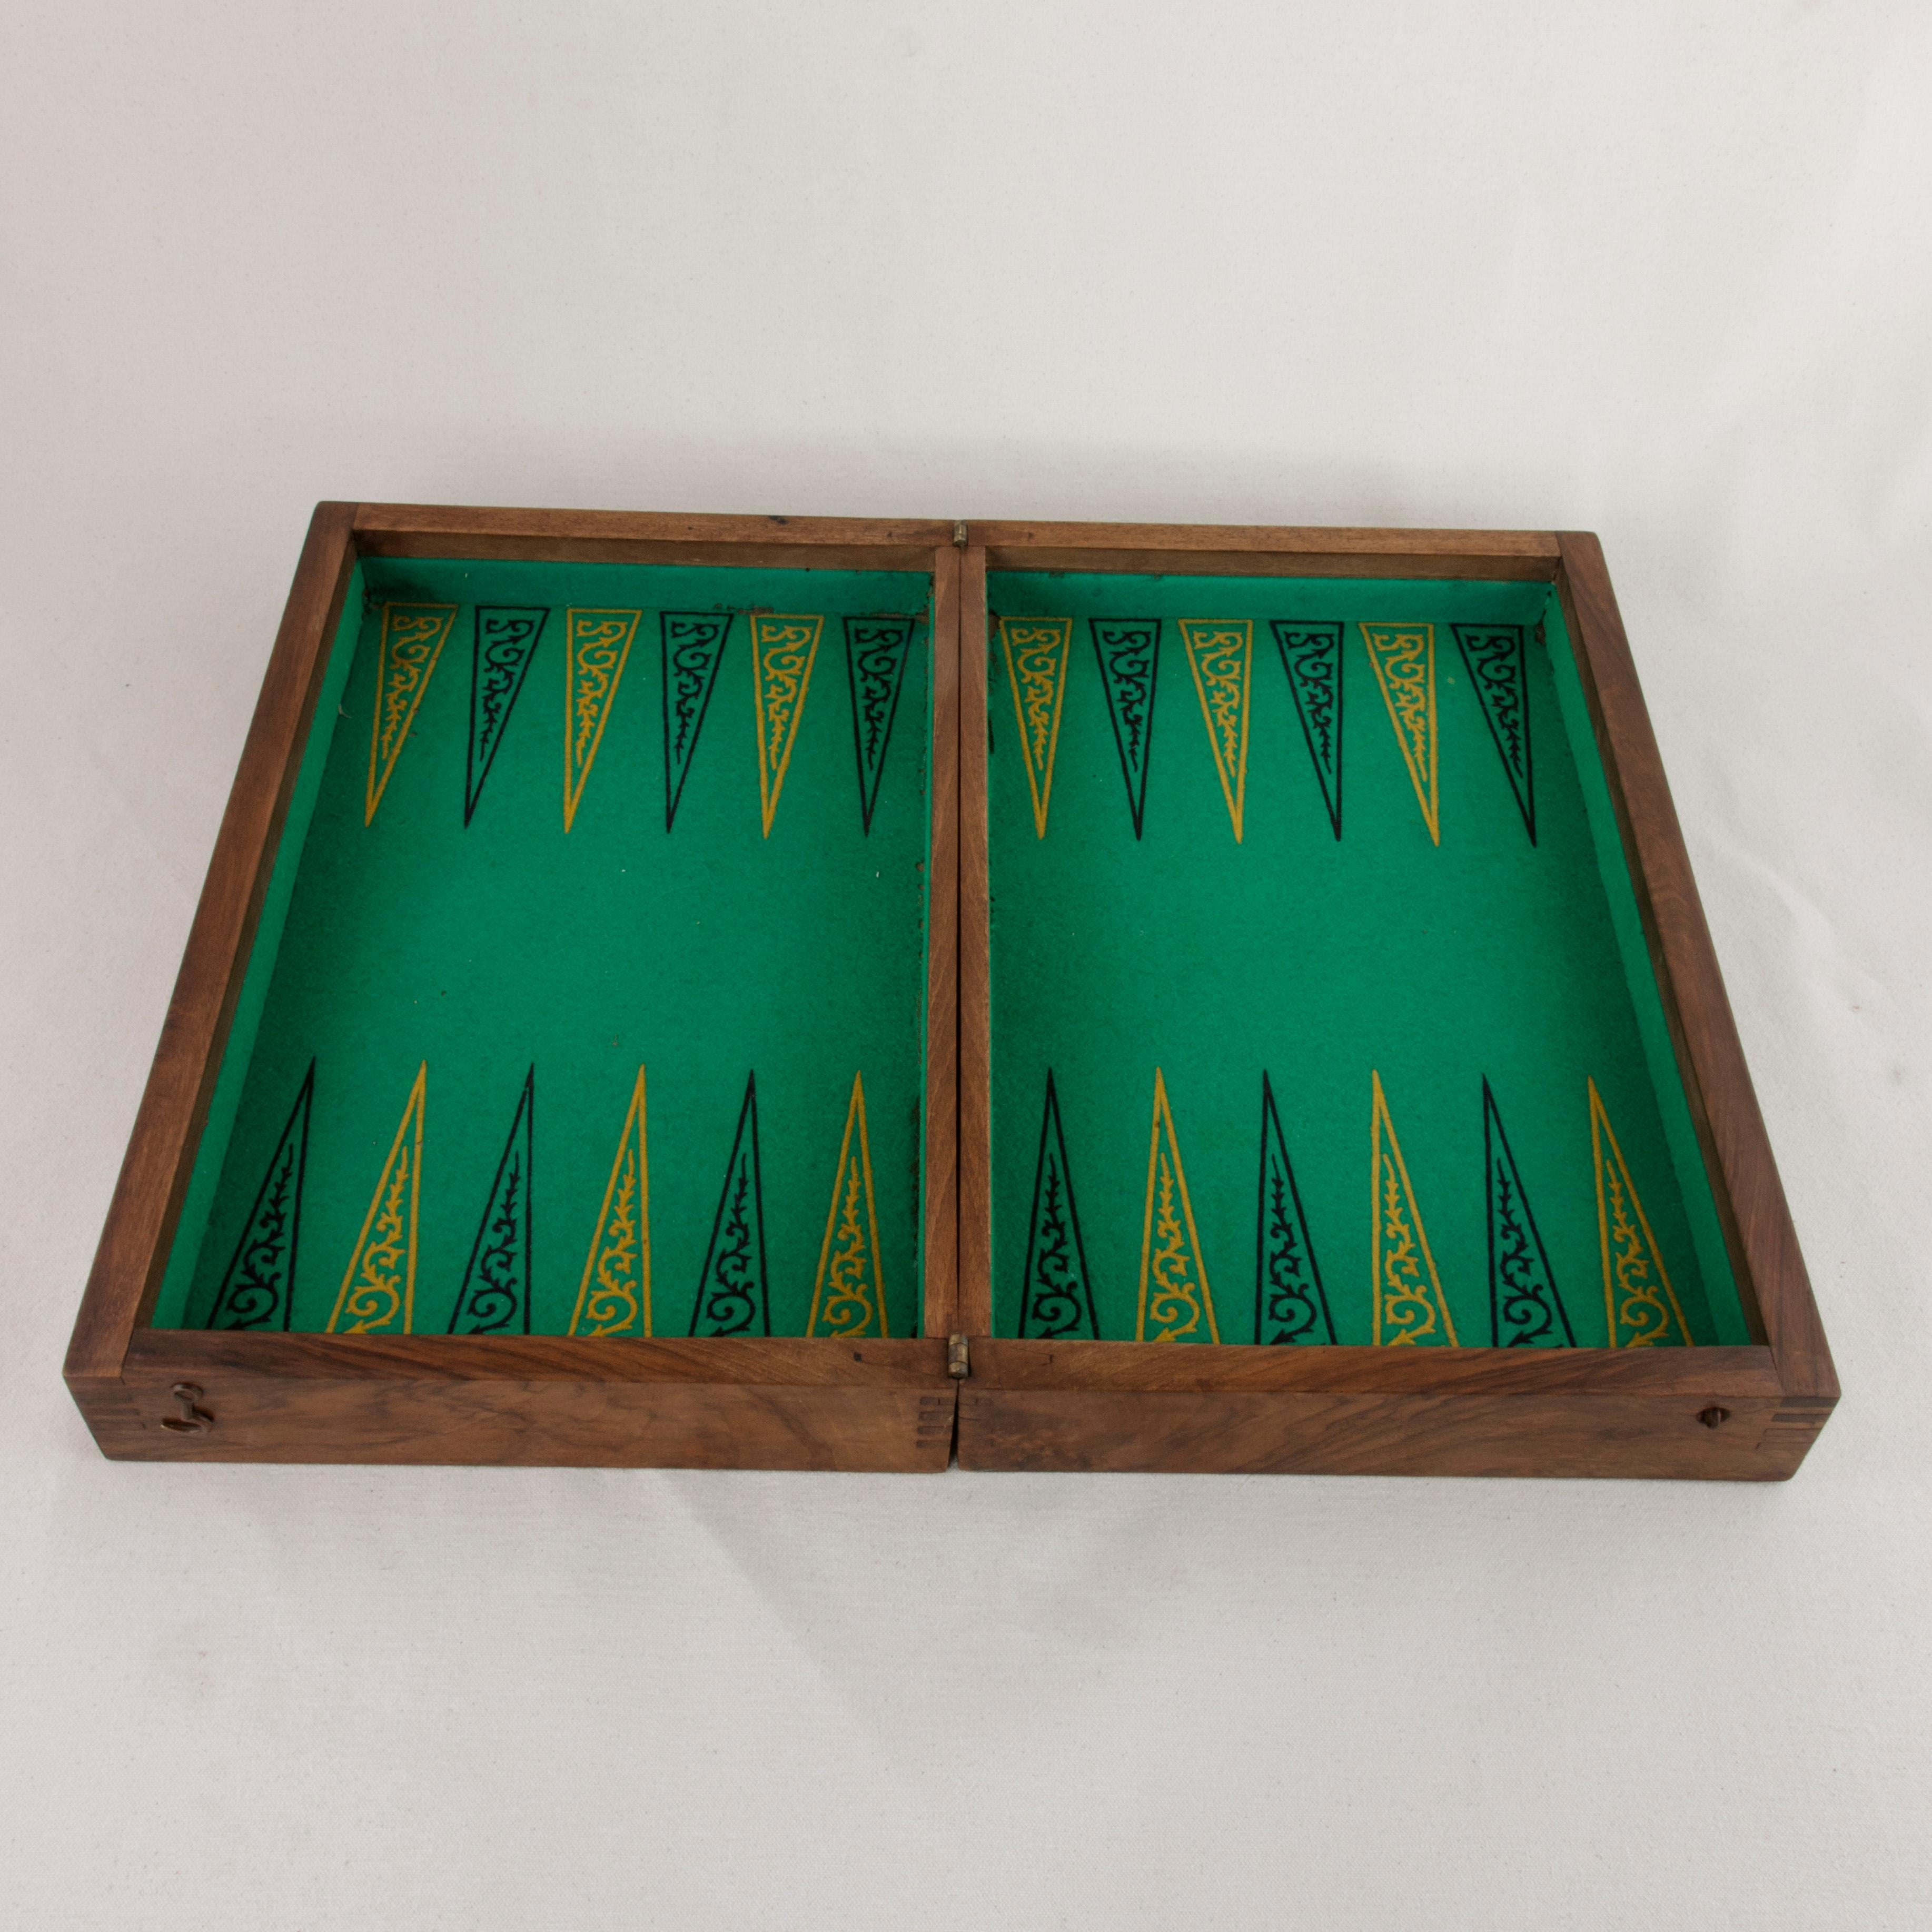 Early 20th Century French Walnut and Pear Wood Marquetry Backgammon & Checkers Game Box, circa 1900